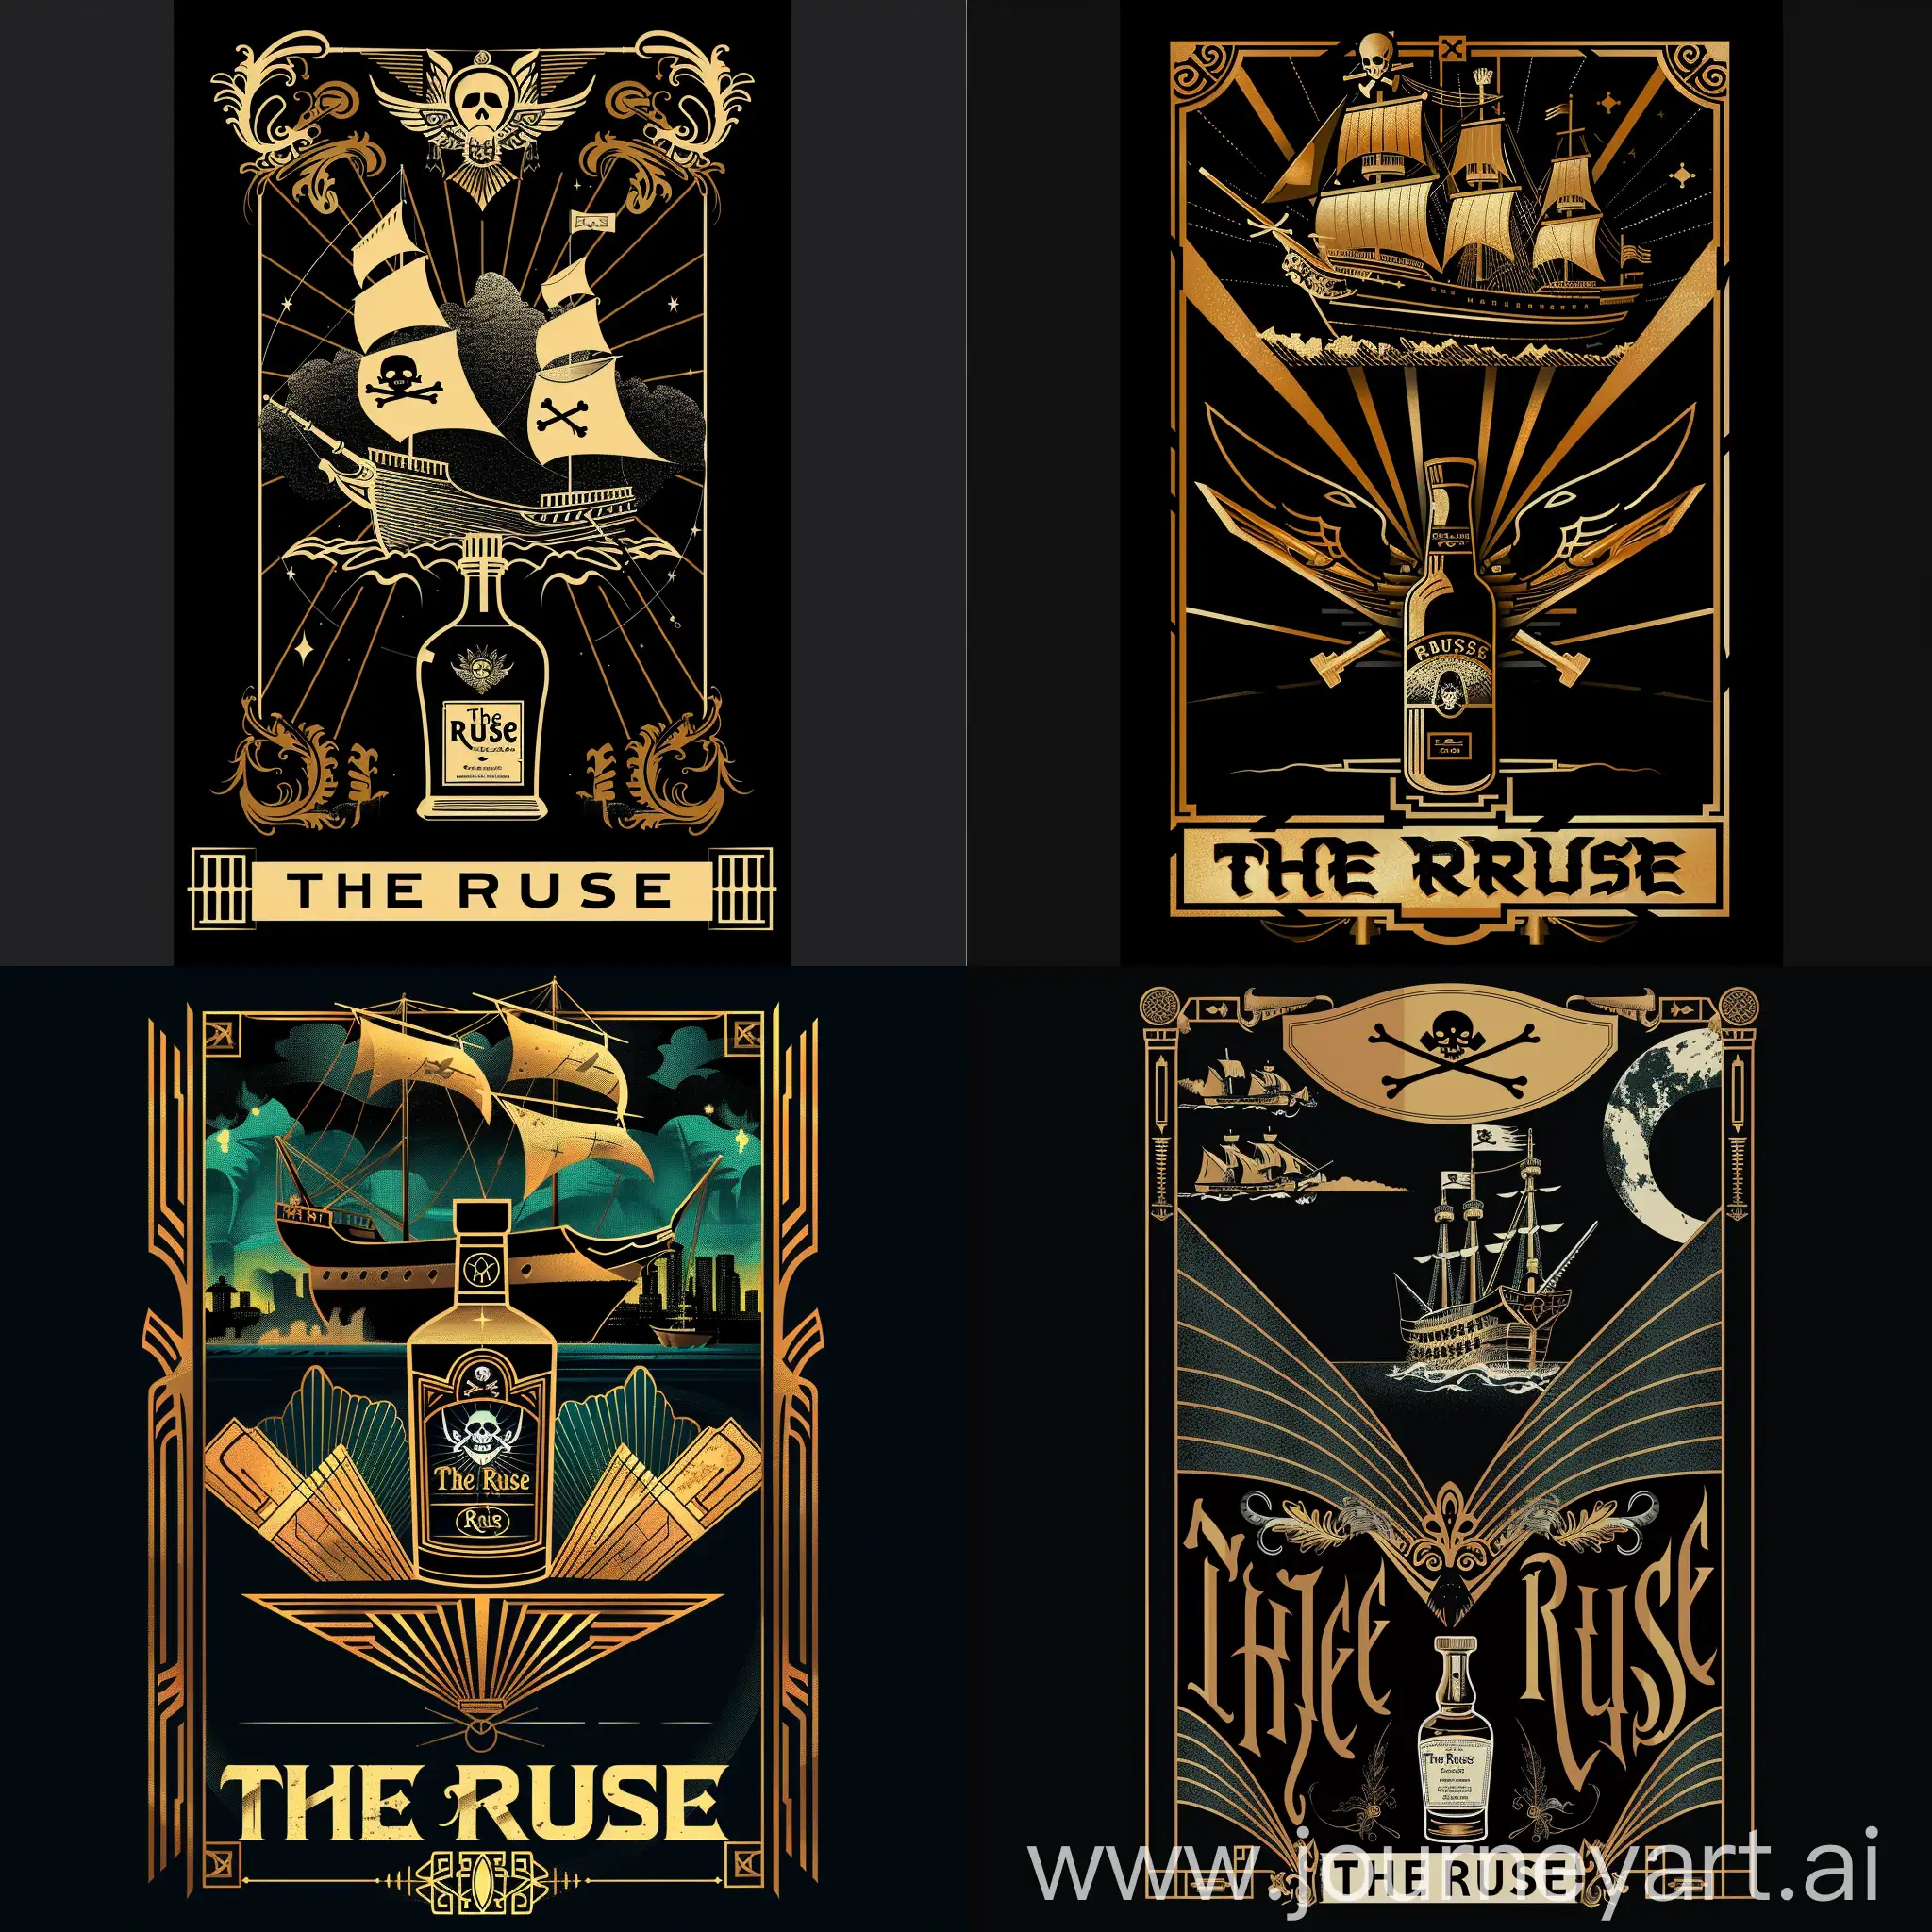 20’s style art deco logo with a pirate ship featured in the top third of the poster, a bottle of cognac, and at the bottom of the poster in an art Deco font “The Ruse”